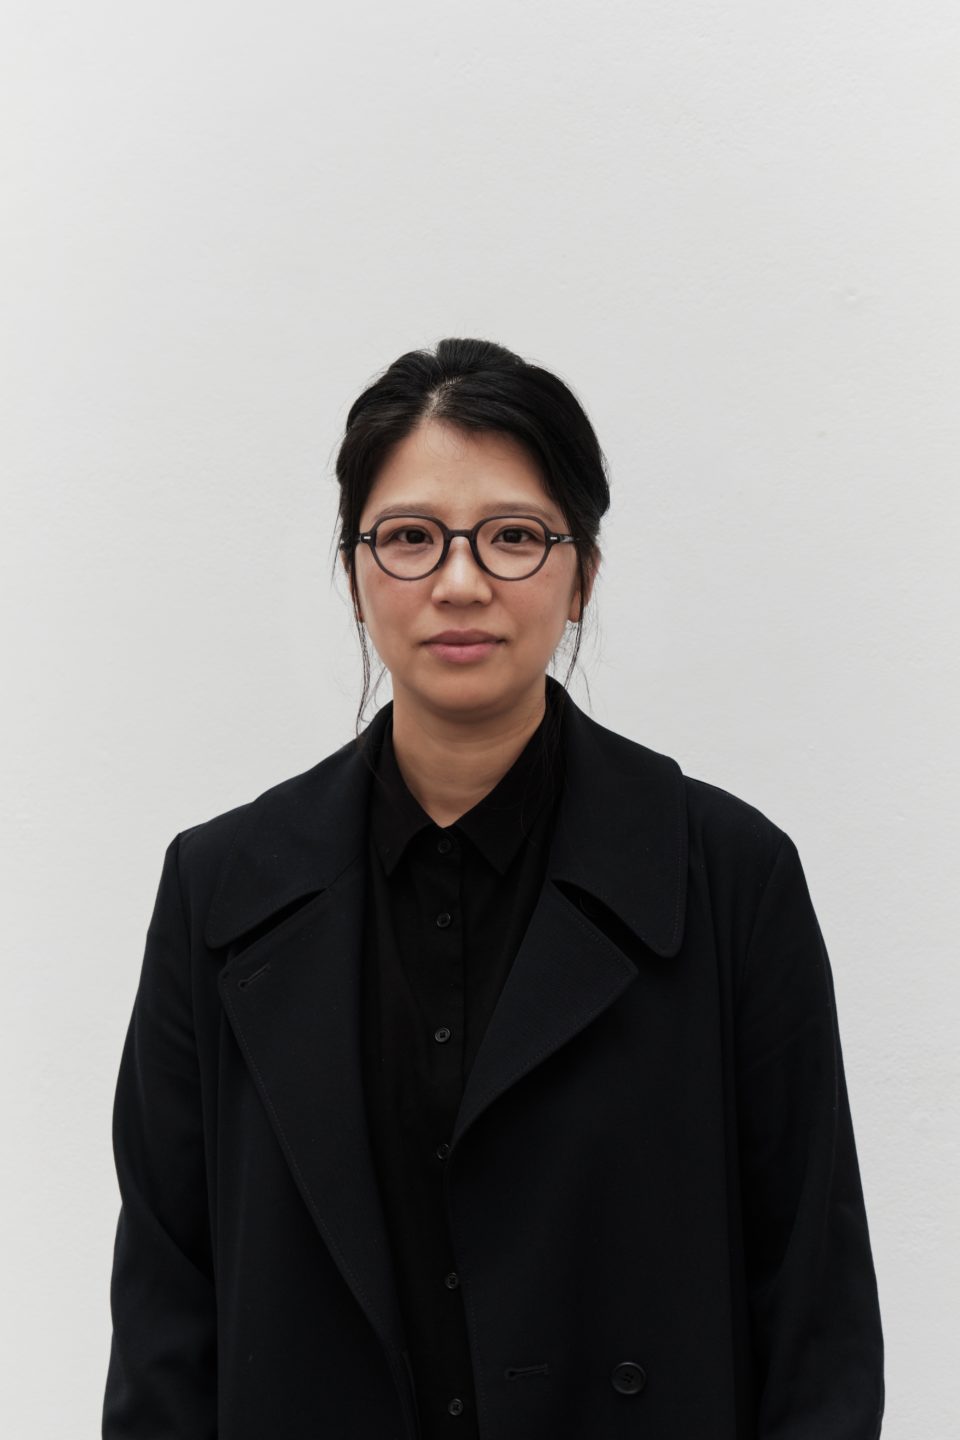 CHANSOOK CHOI ON MEDIA, ART, SAFE SPACES AND PORTRAYING FEMALE NARRATIVES